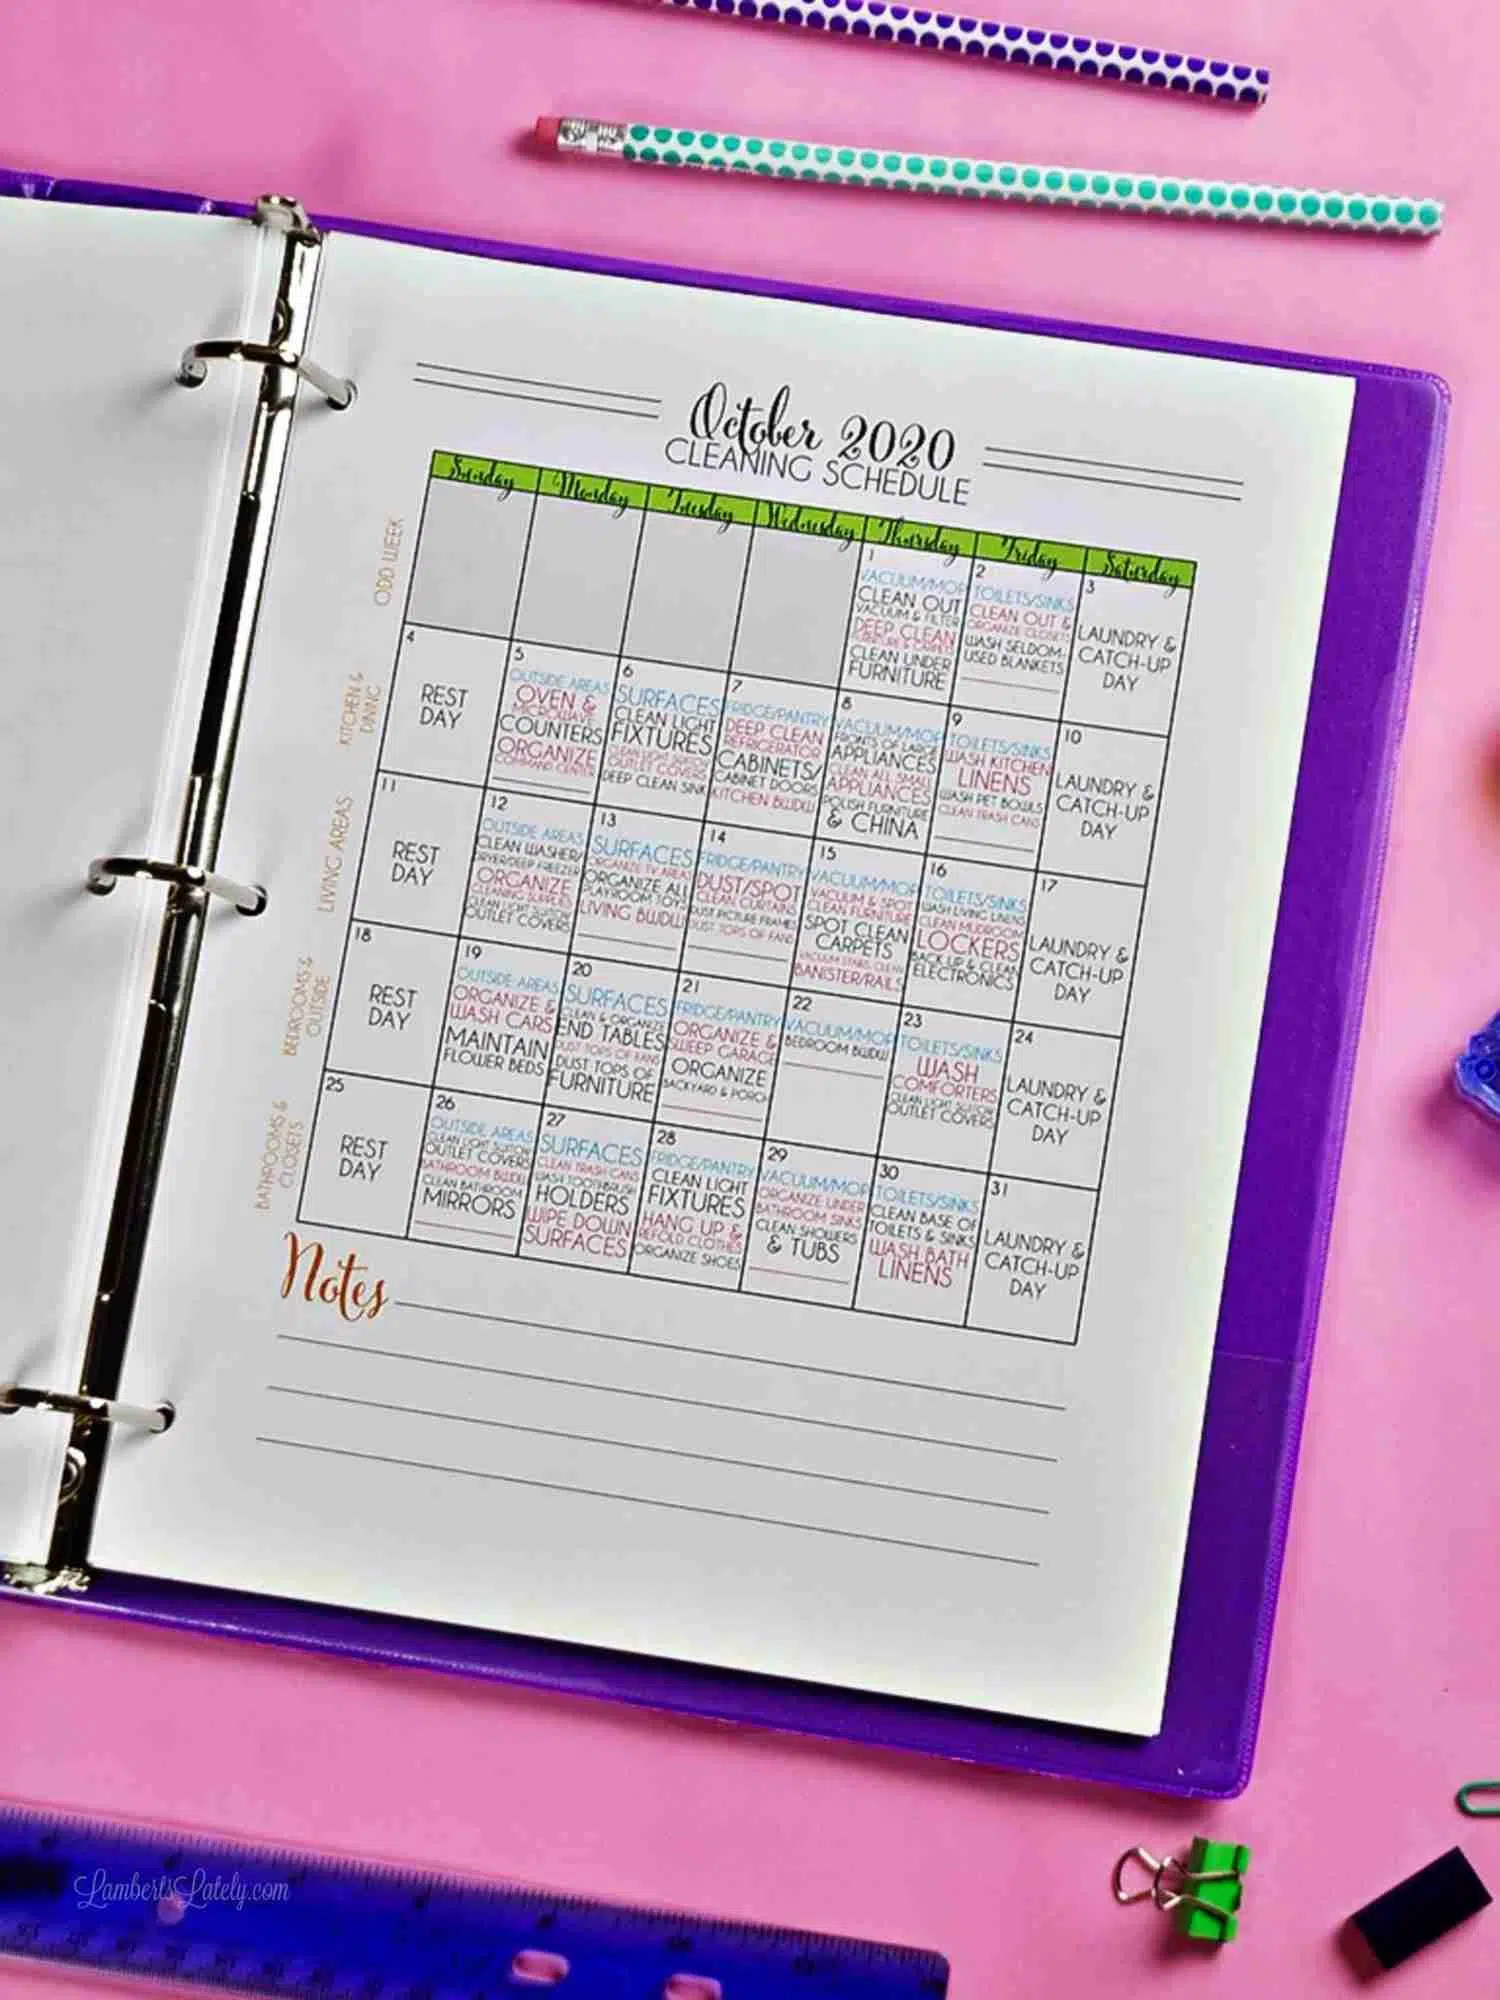 October 2020 cleaning schedule in a notebook